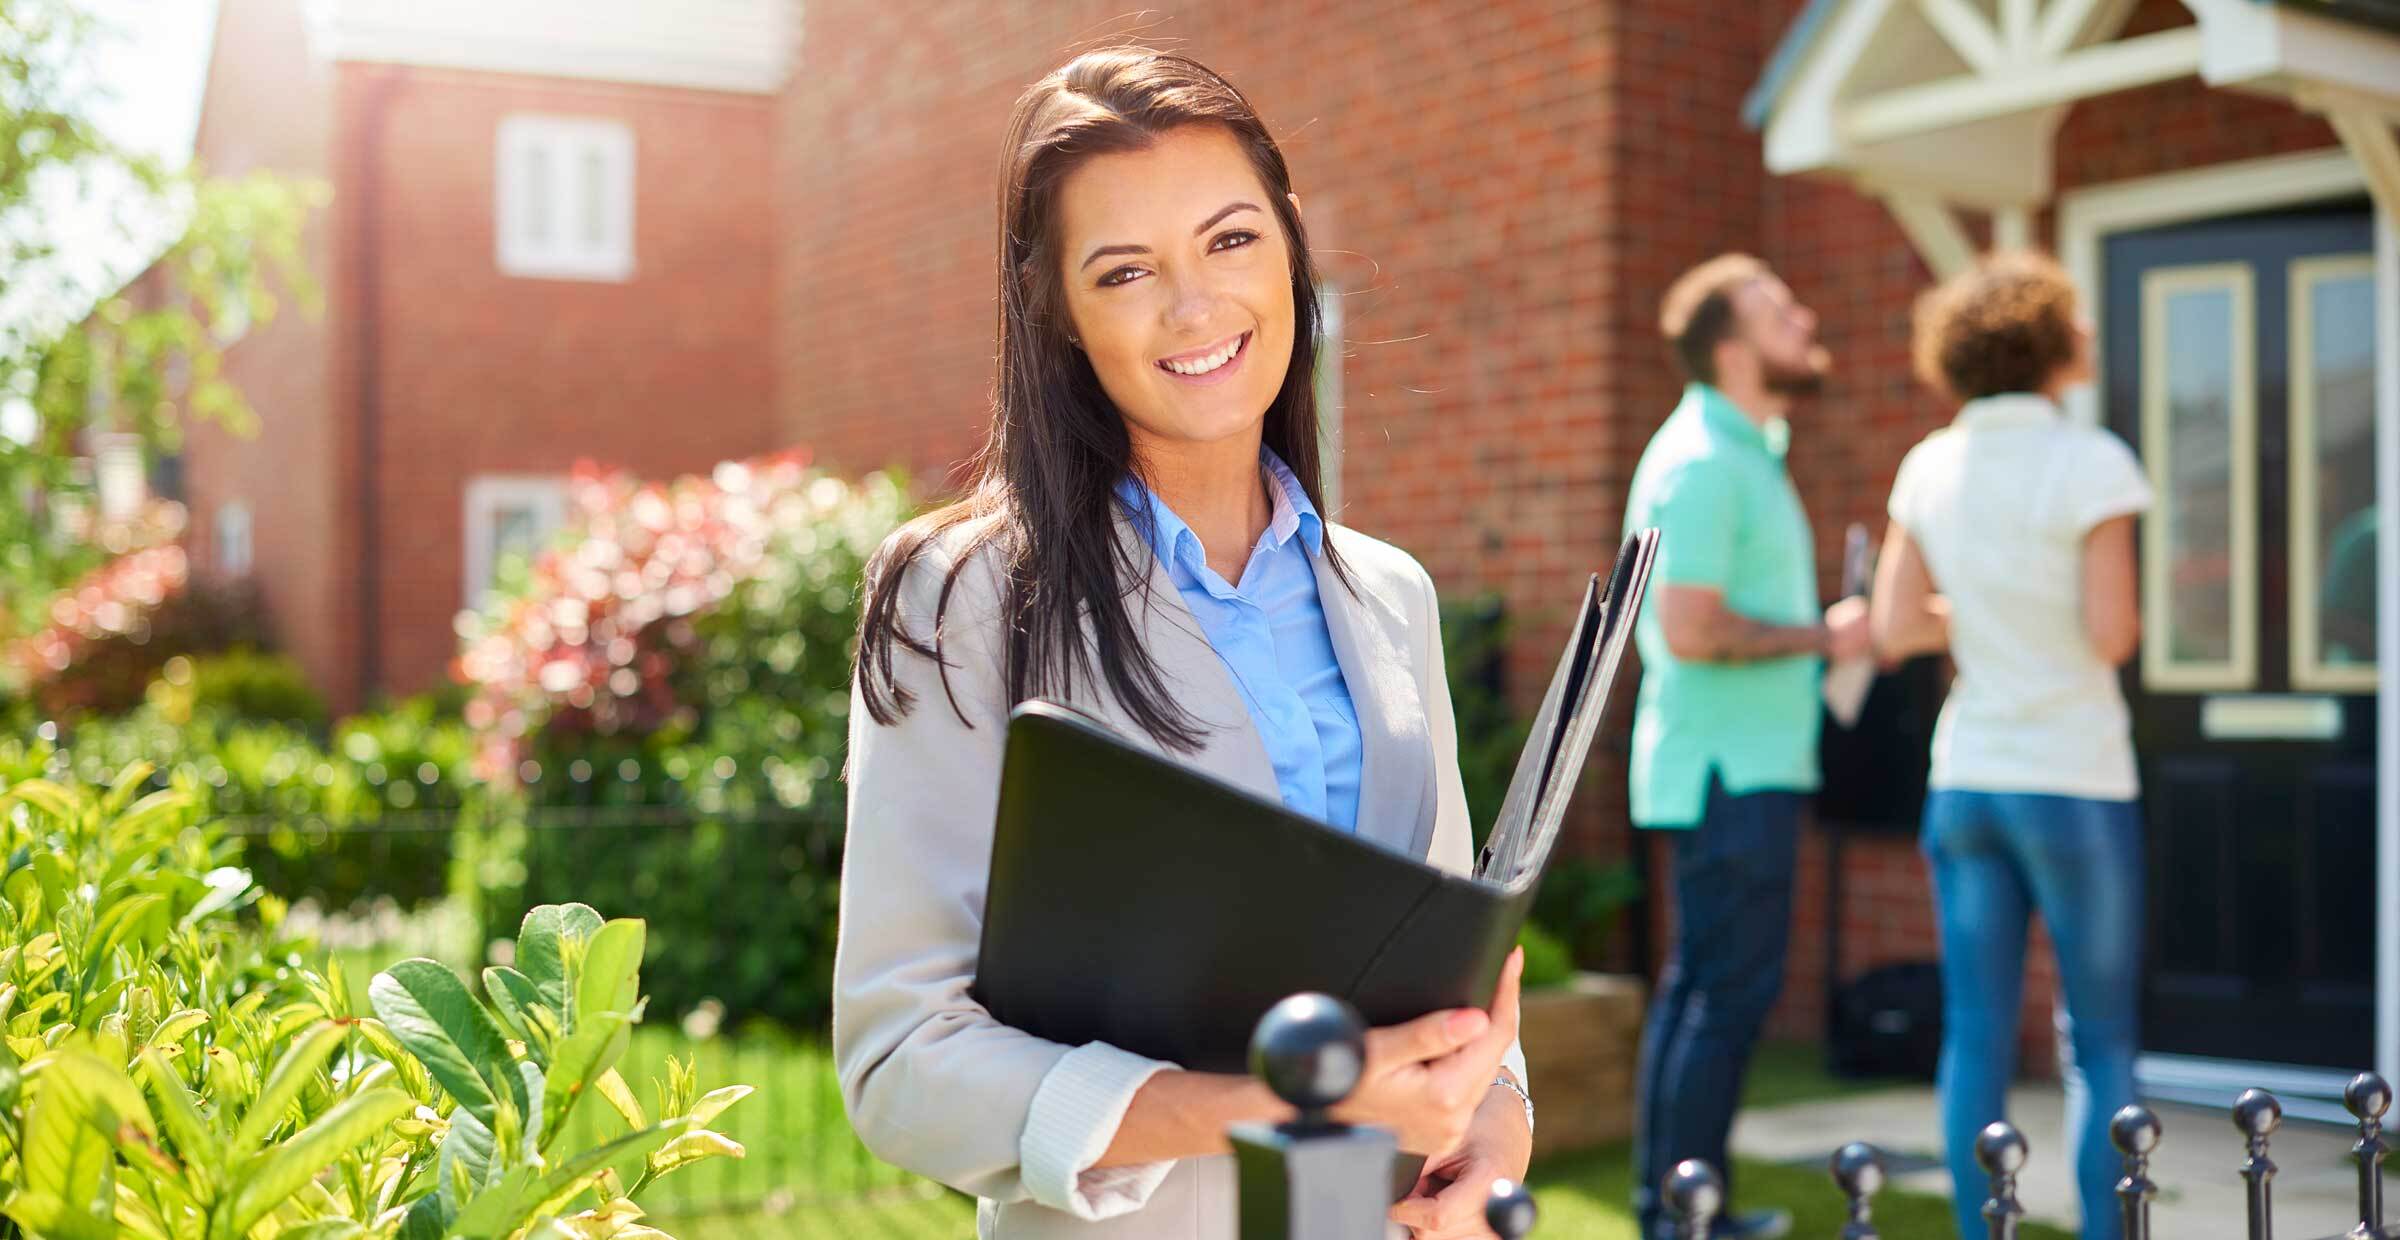 real estate agent holding binder smiles at camera while couple in background looks at house